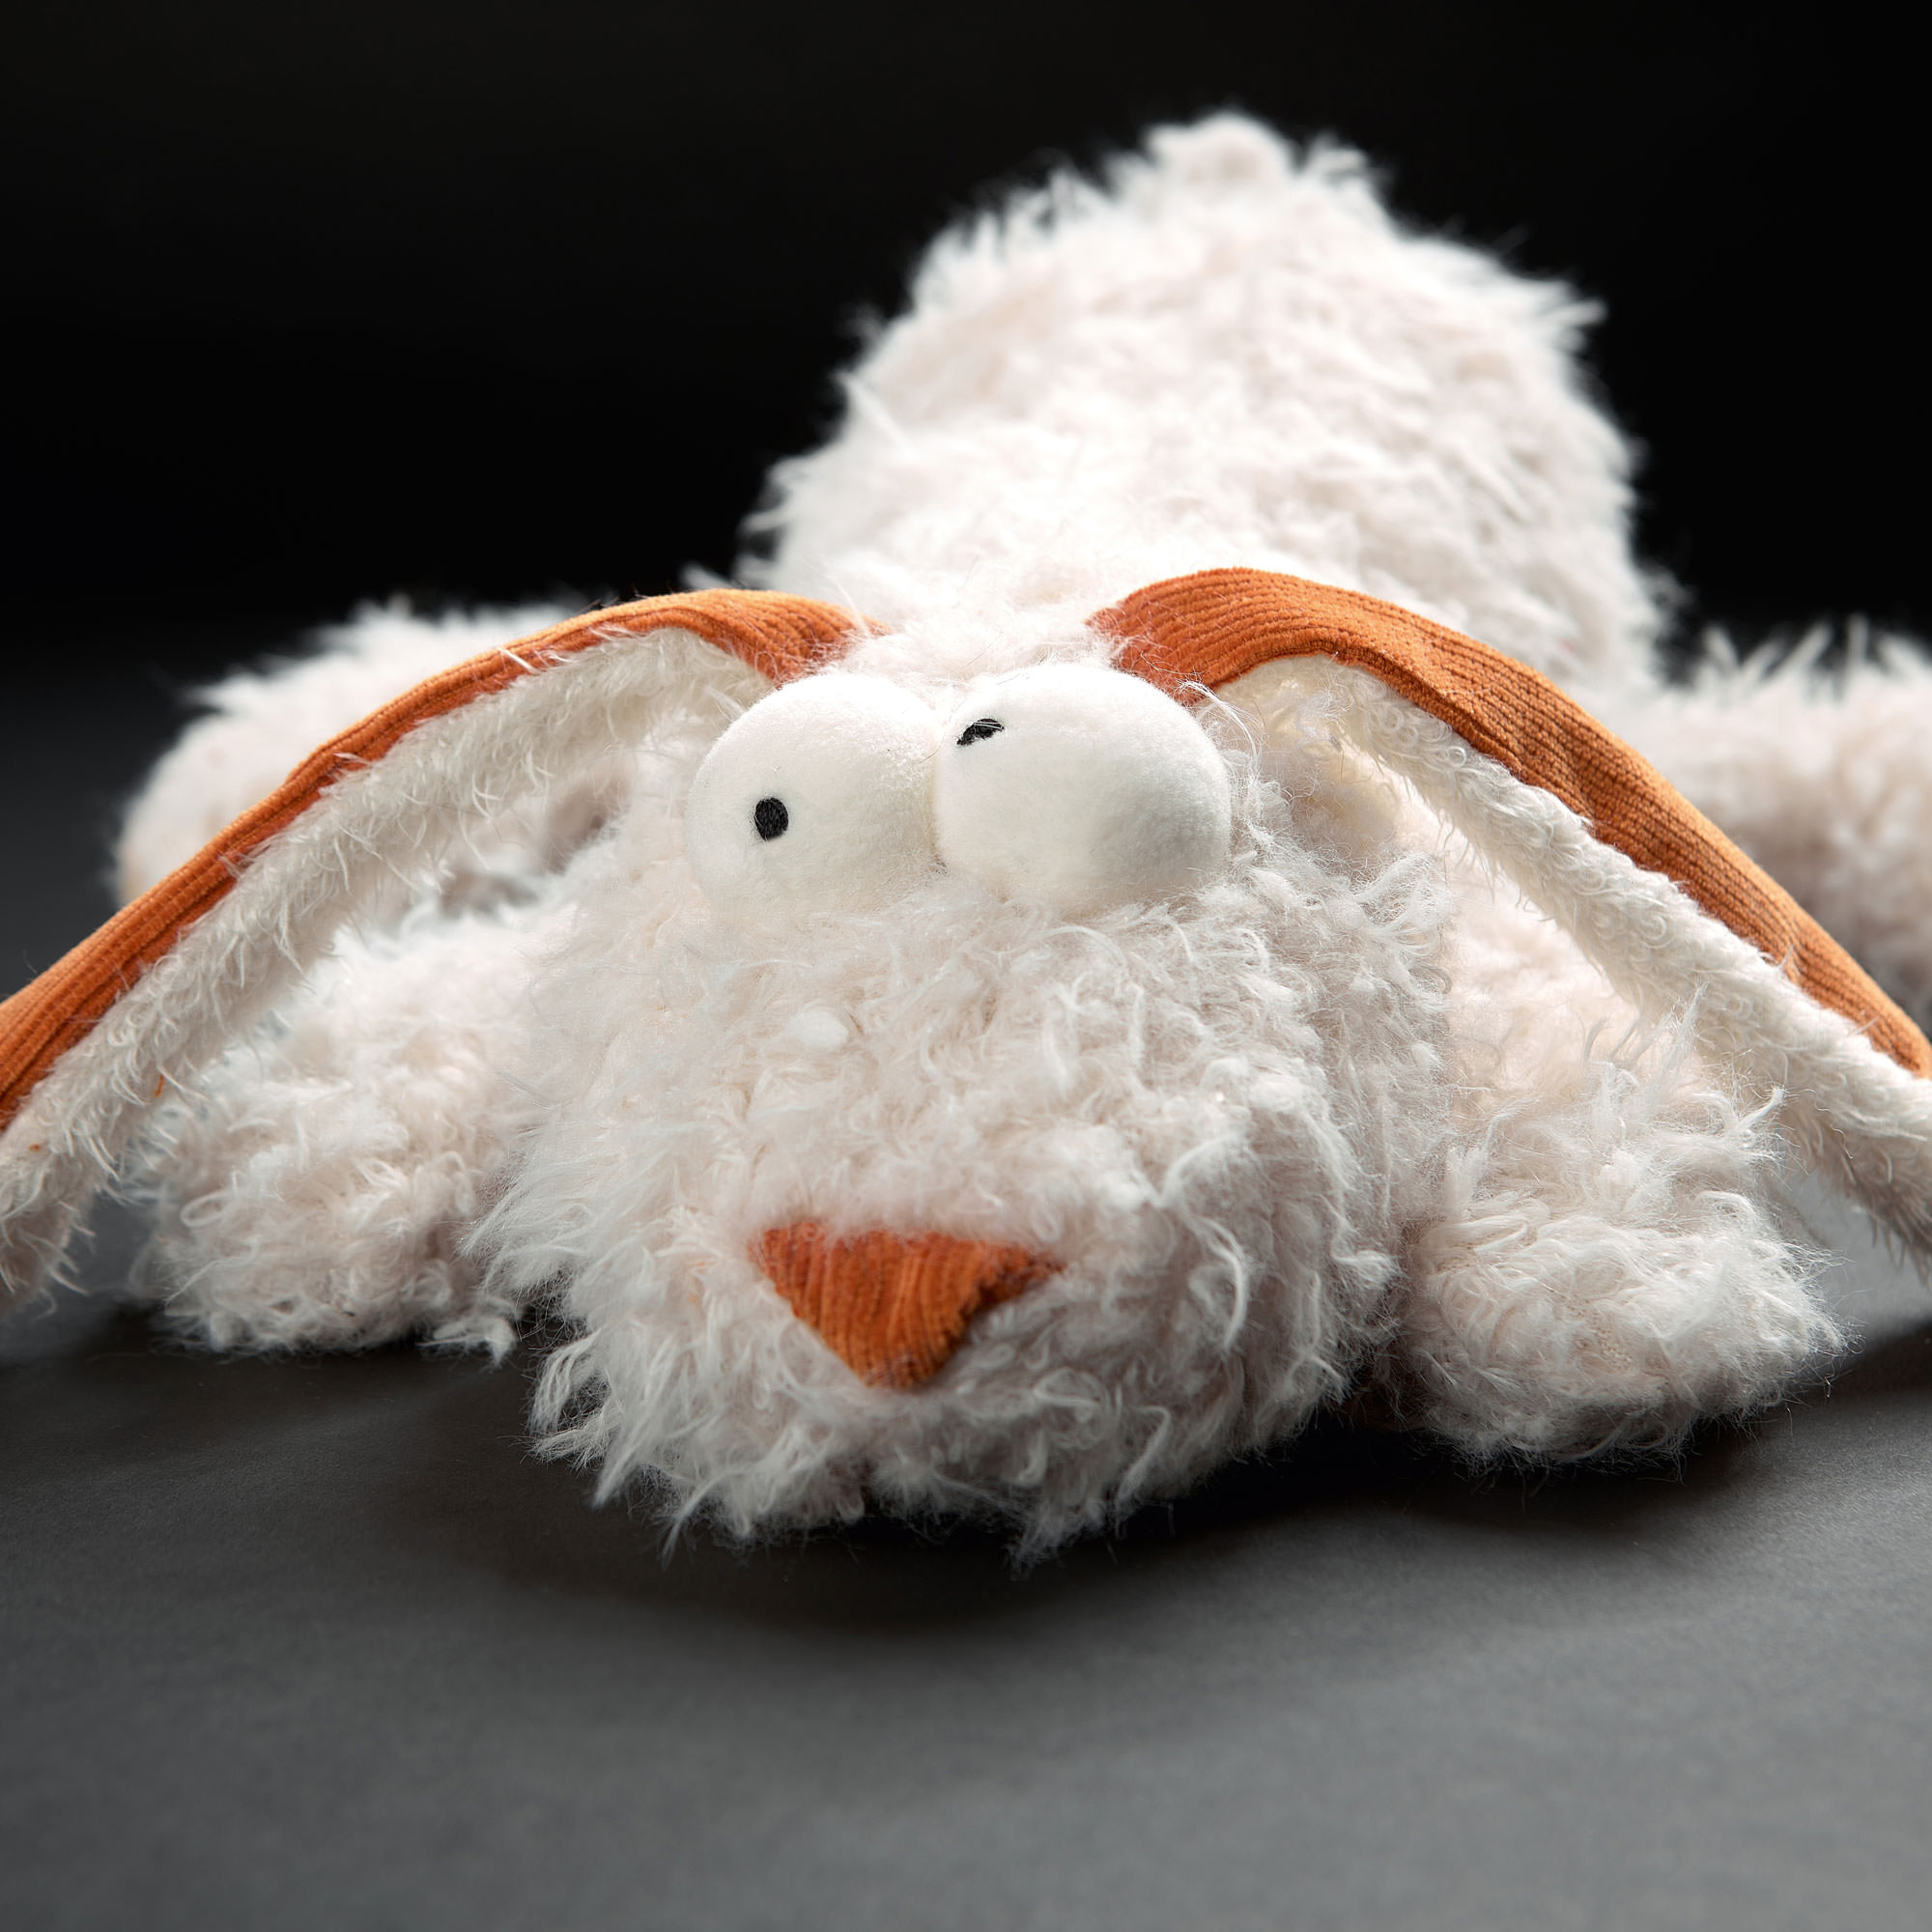 Plush toy bunny Easter Beaster, Beasts collection